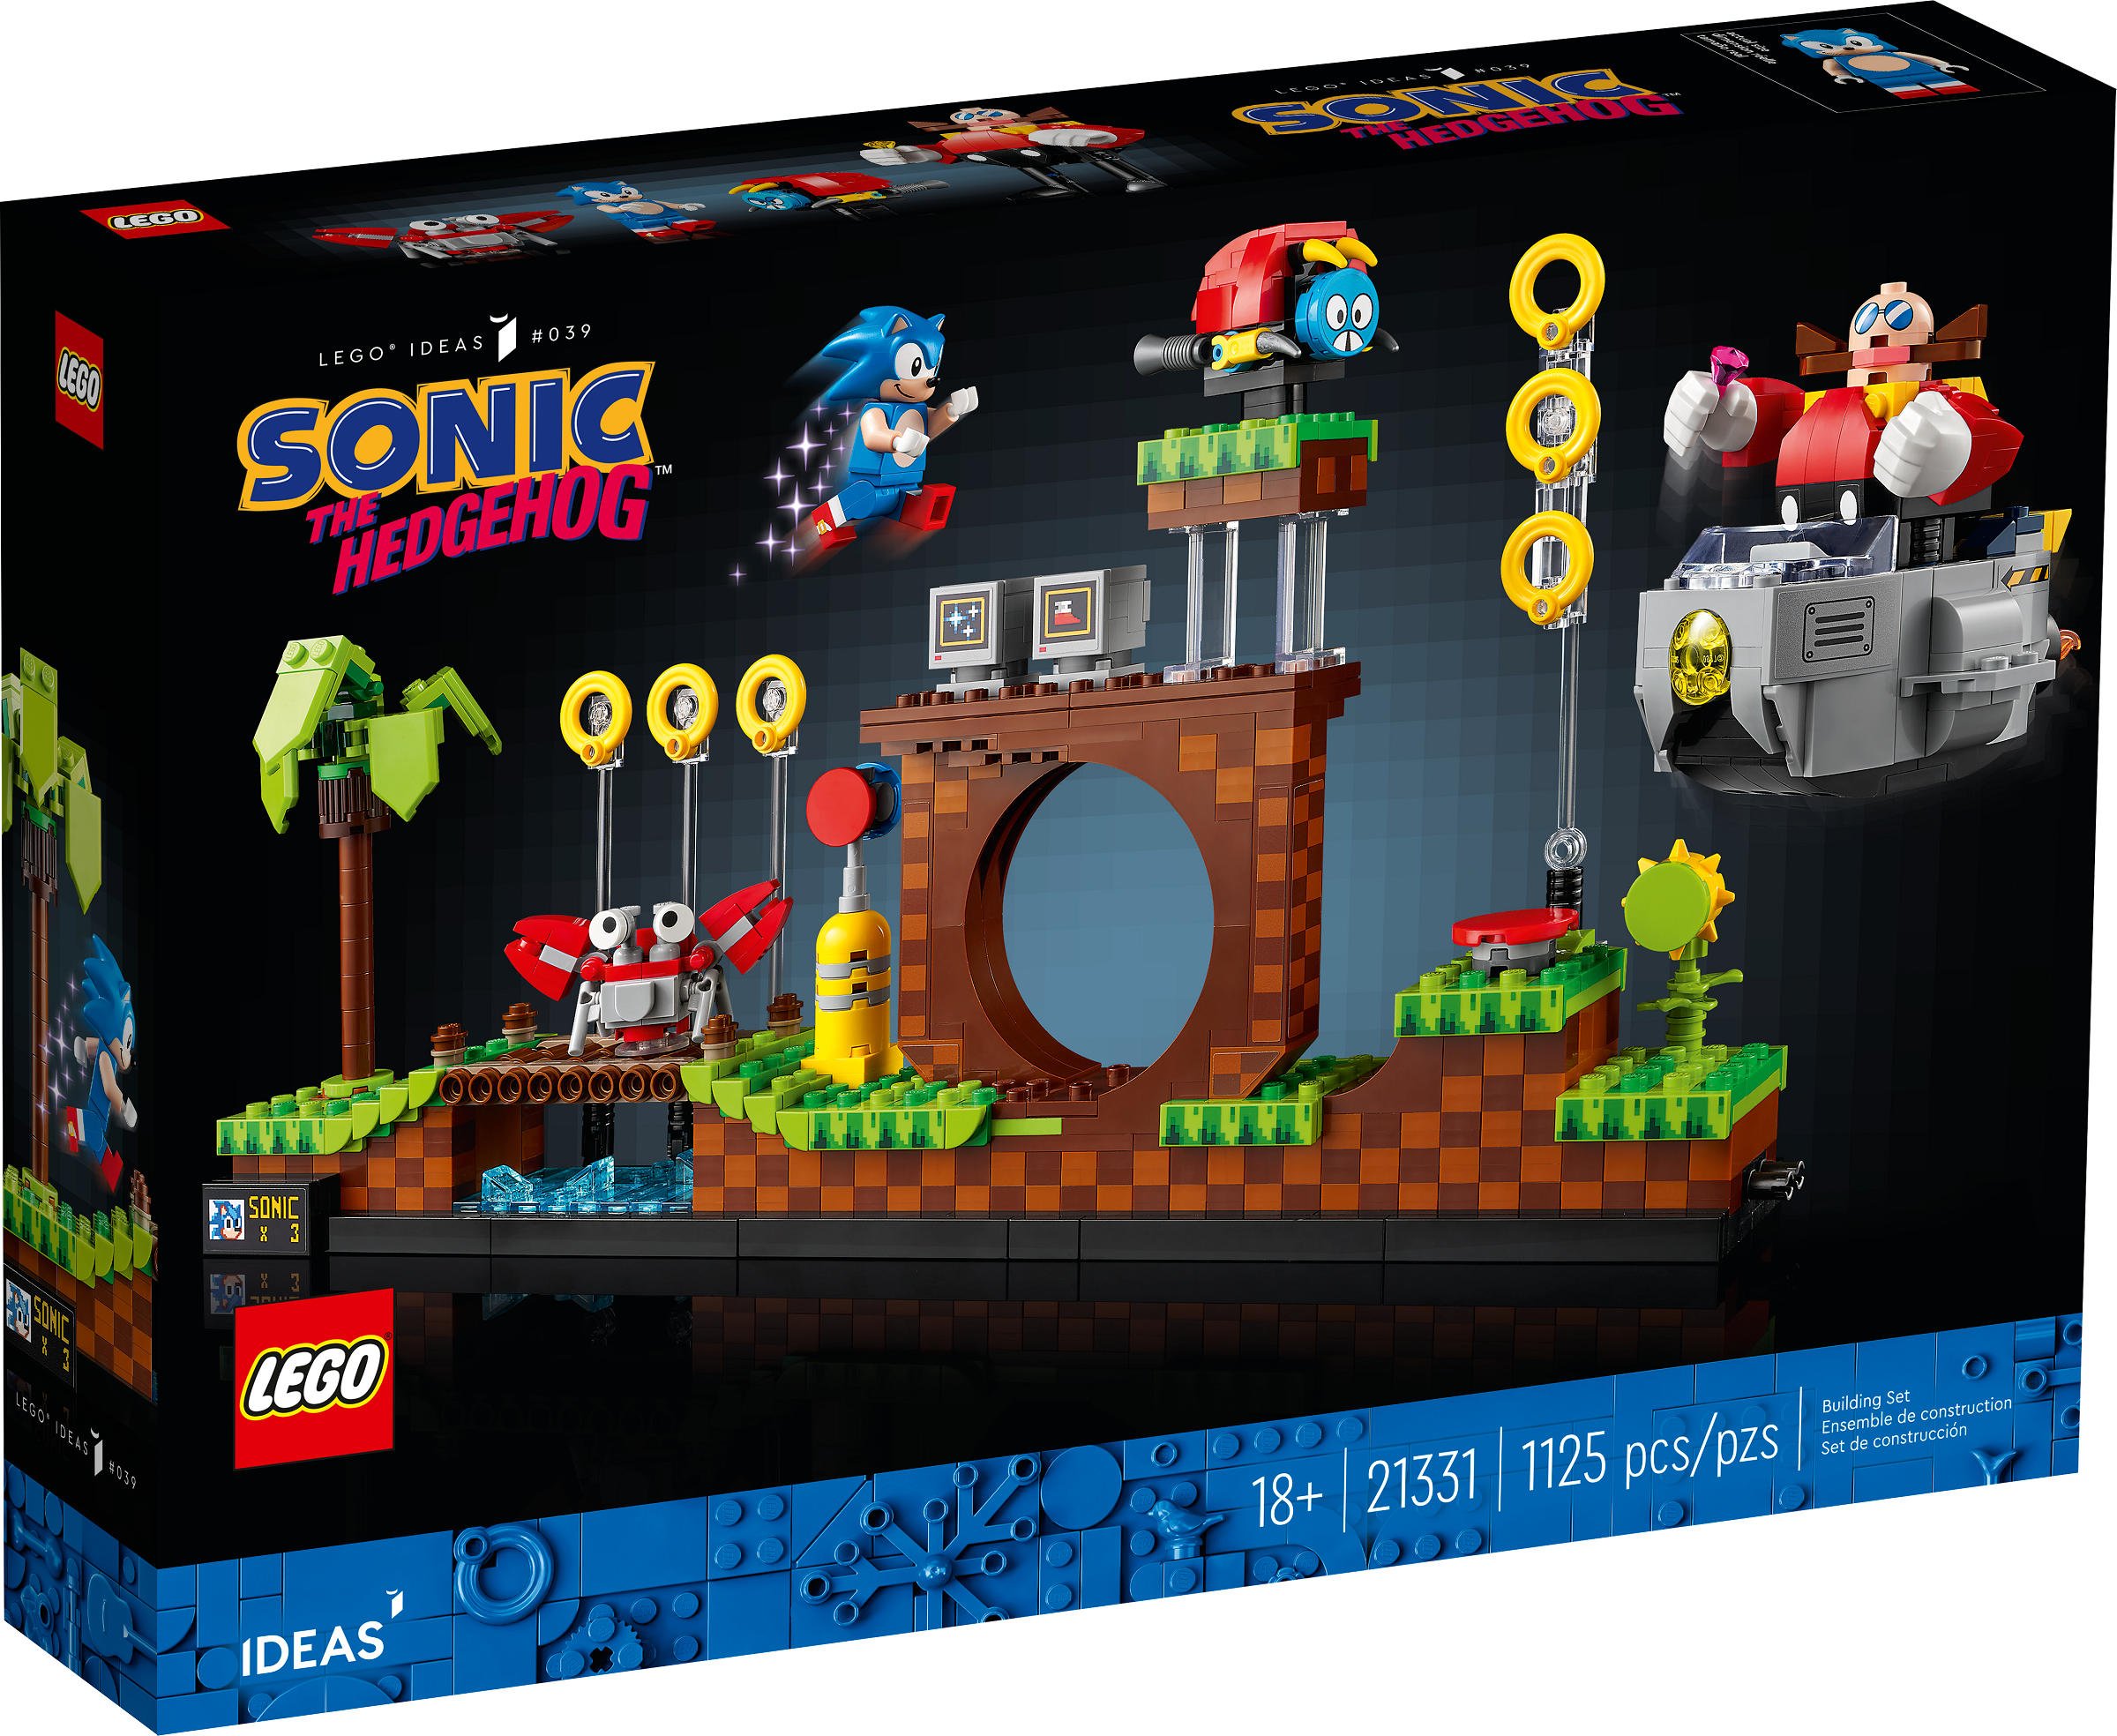 Lego Sonic the Hedgehog – Green Hill Zone review